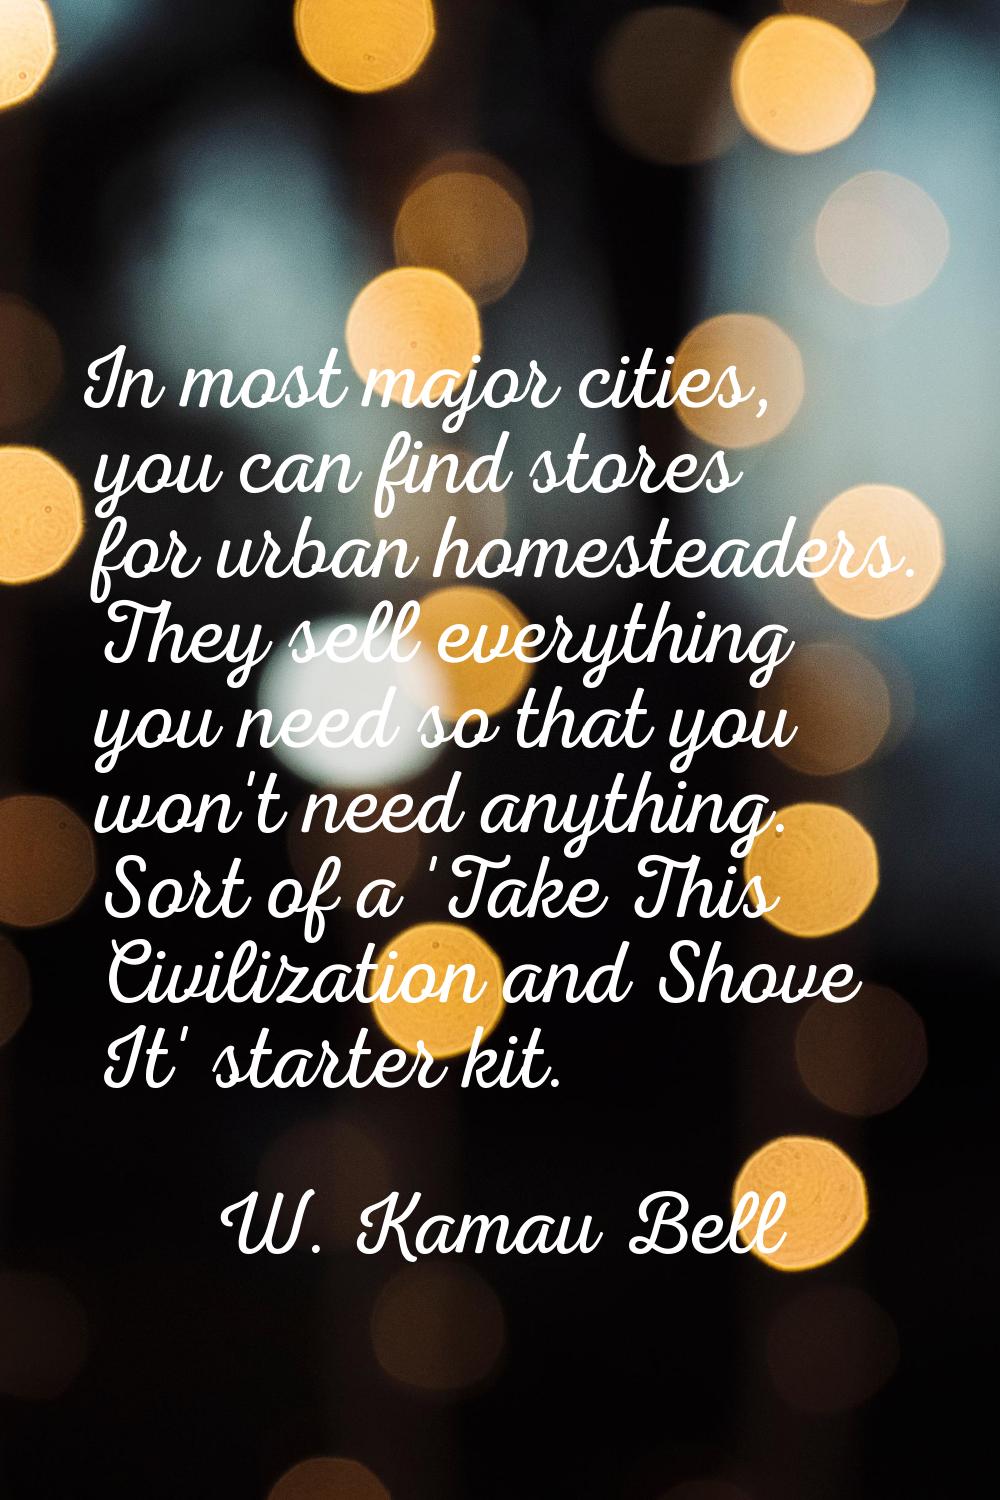 In most major cities, you can find stores for urban homesteaders. They sell everything you need so 